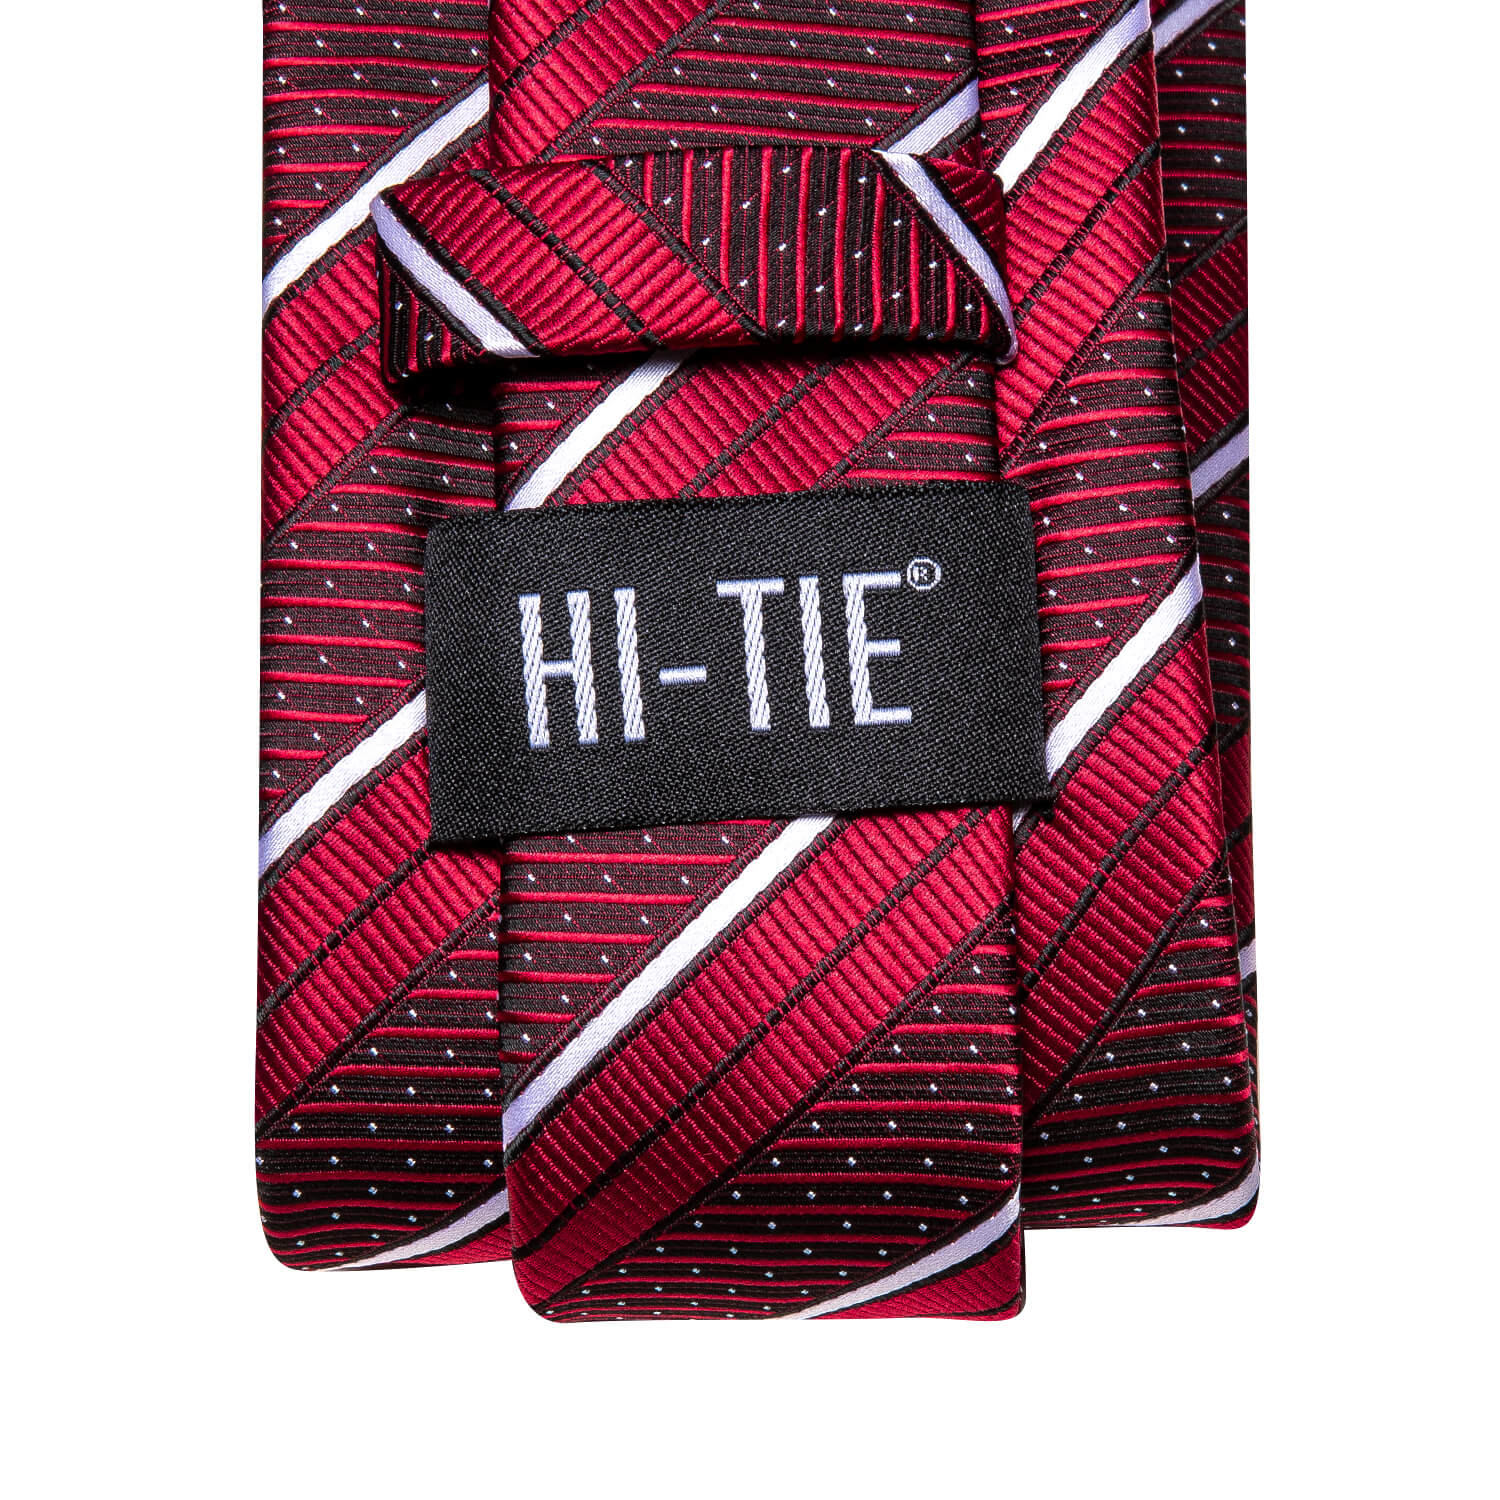 Red Tie with White Stripes Pocket Square Cufflinks Set